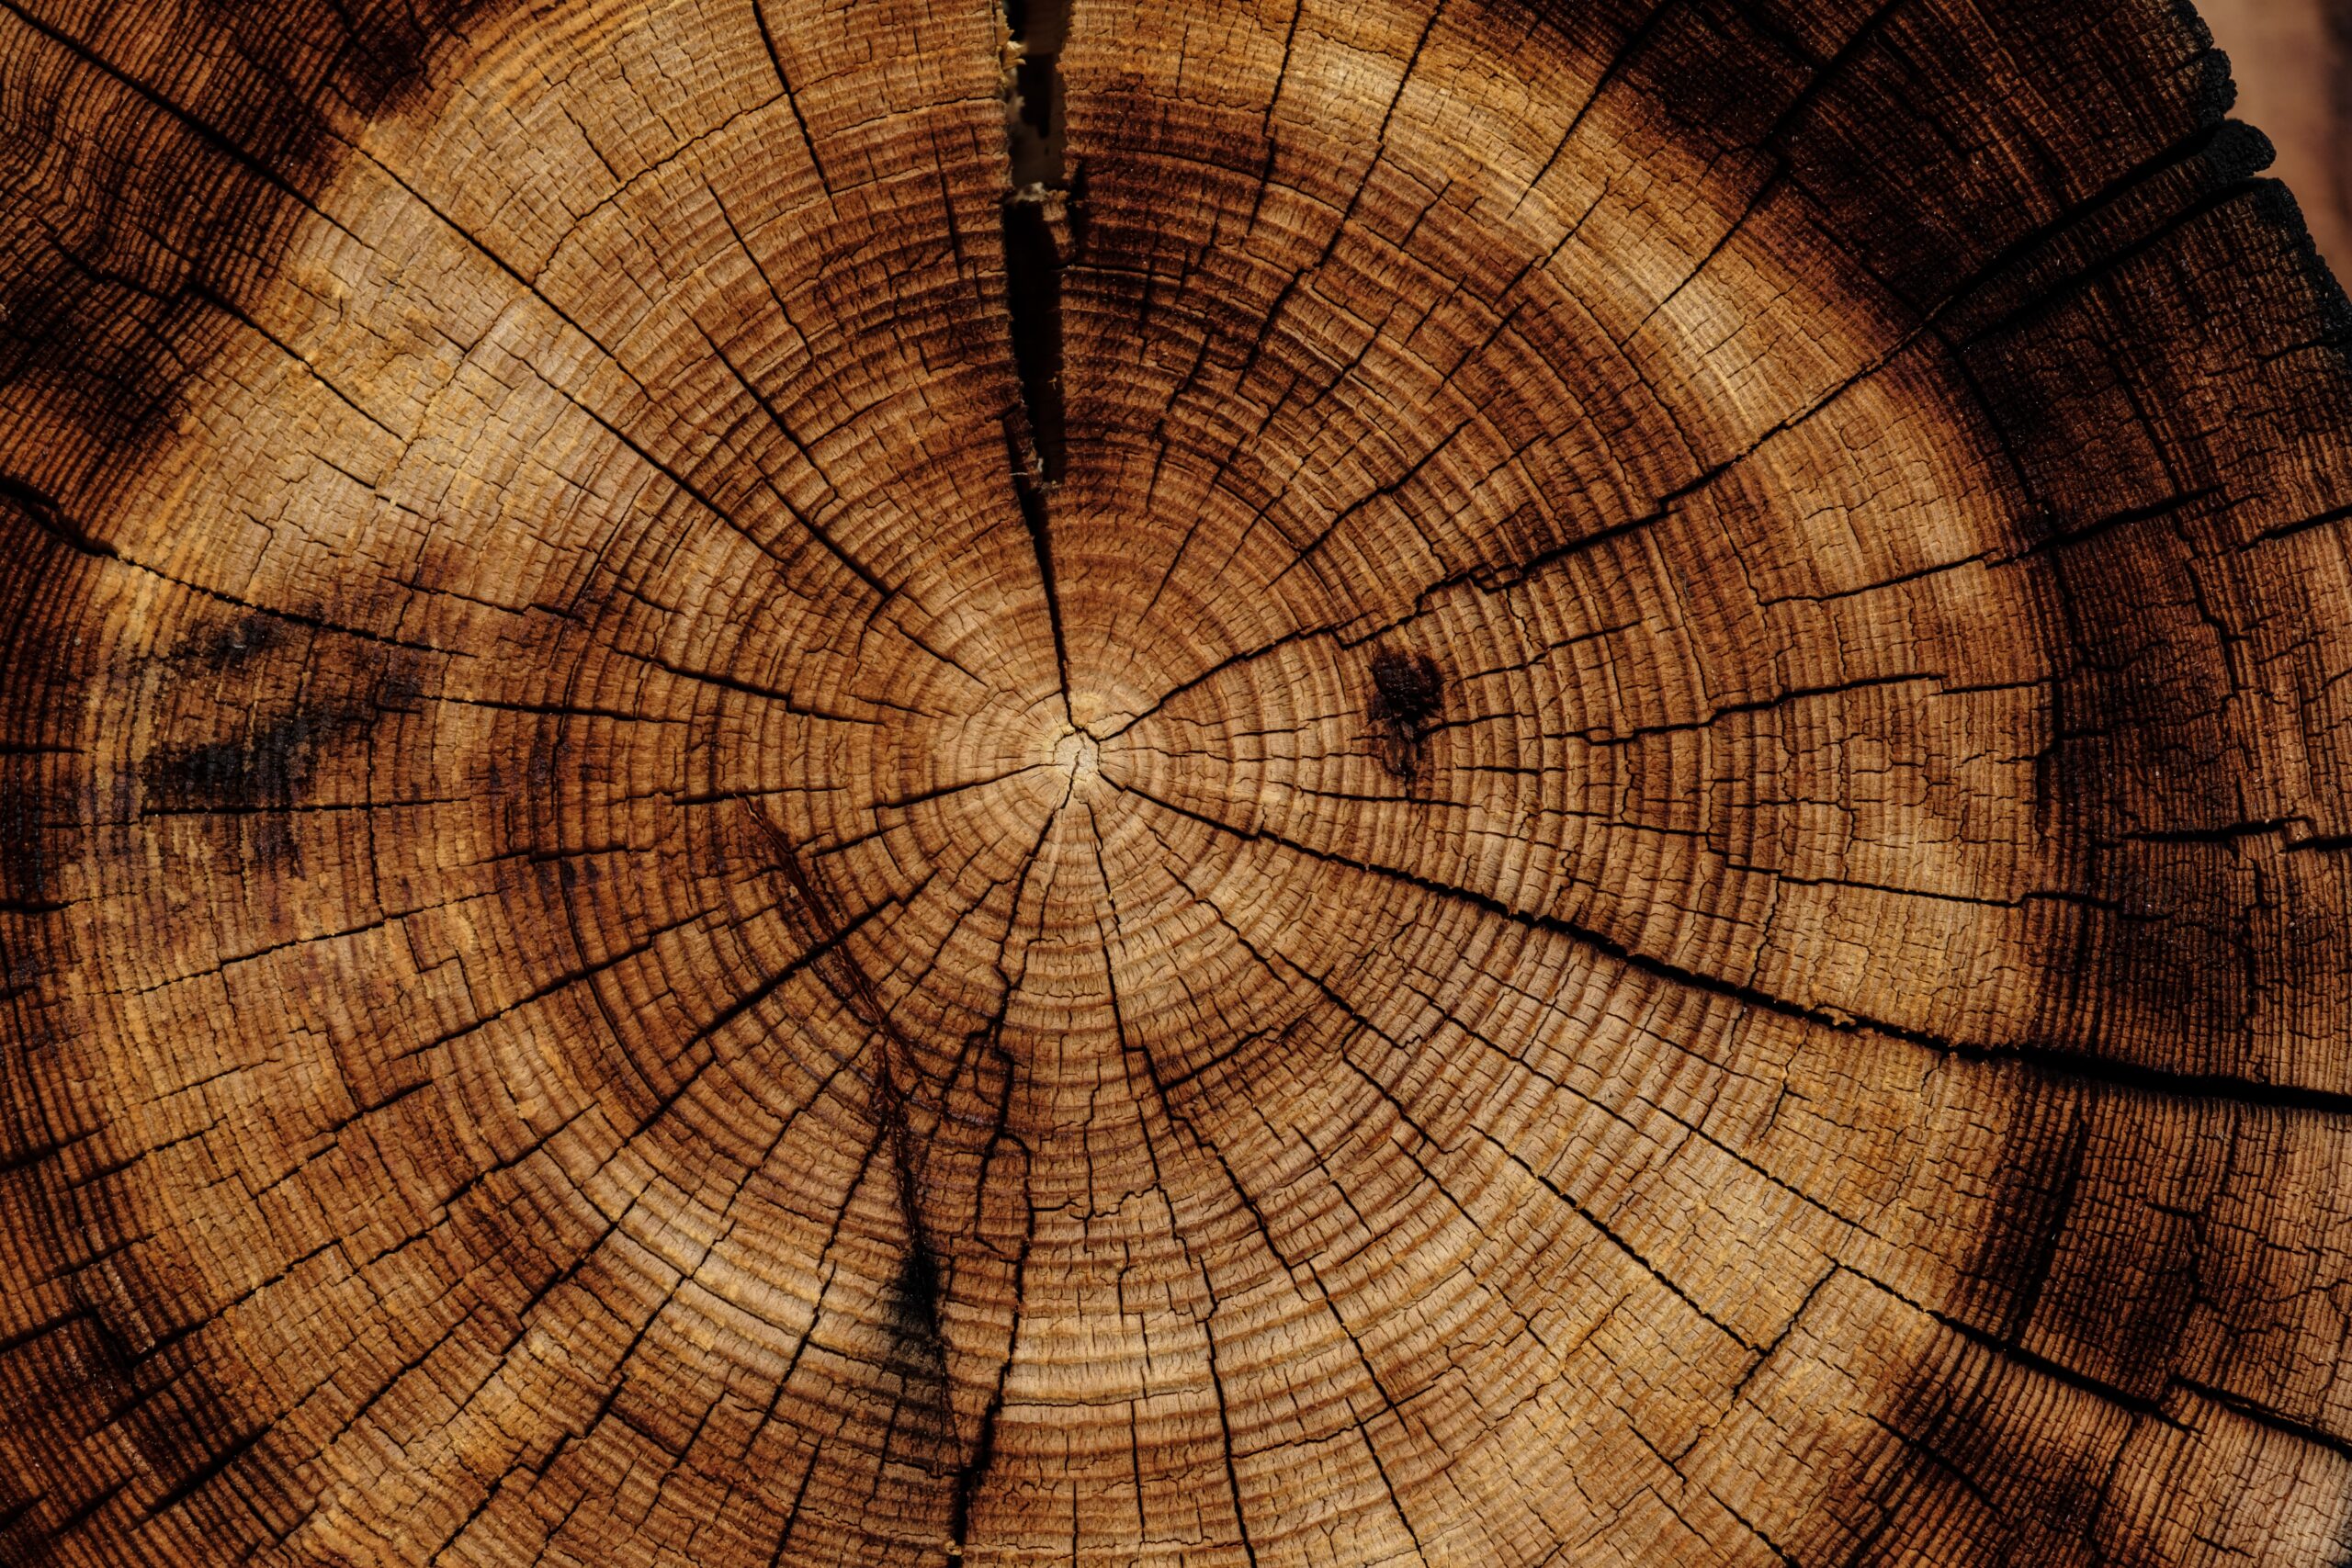 Tree rings represent the way ADHD sits at the center of life